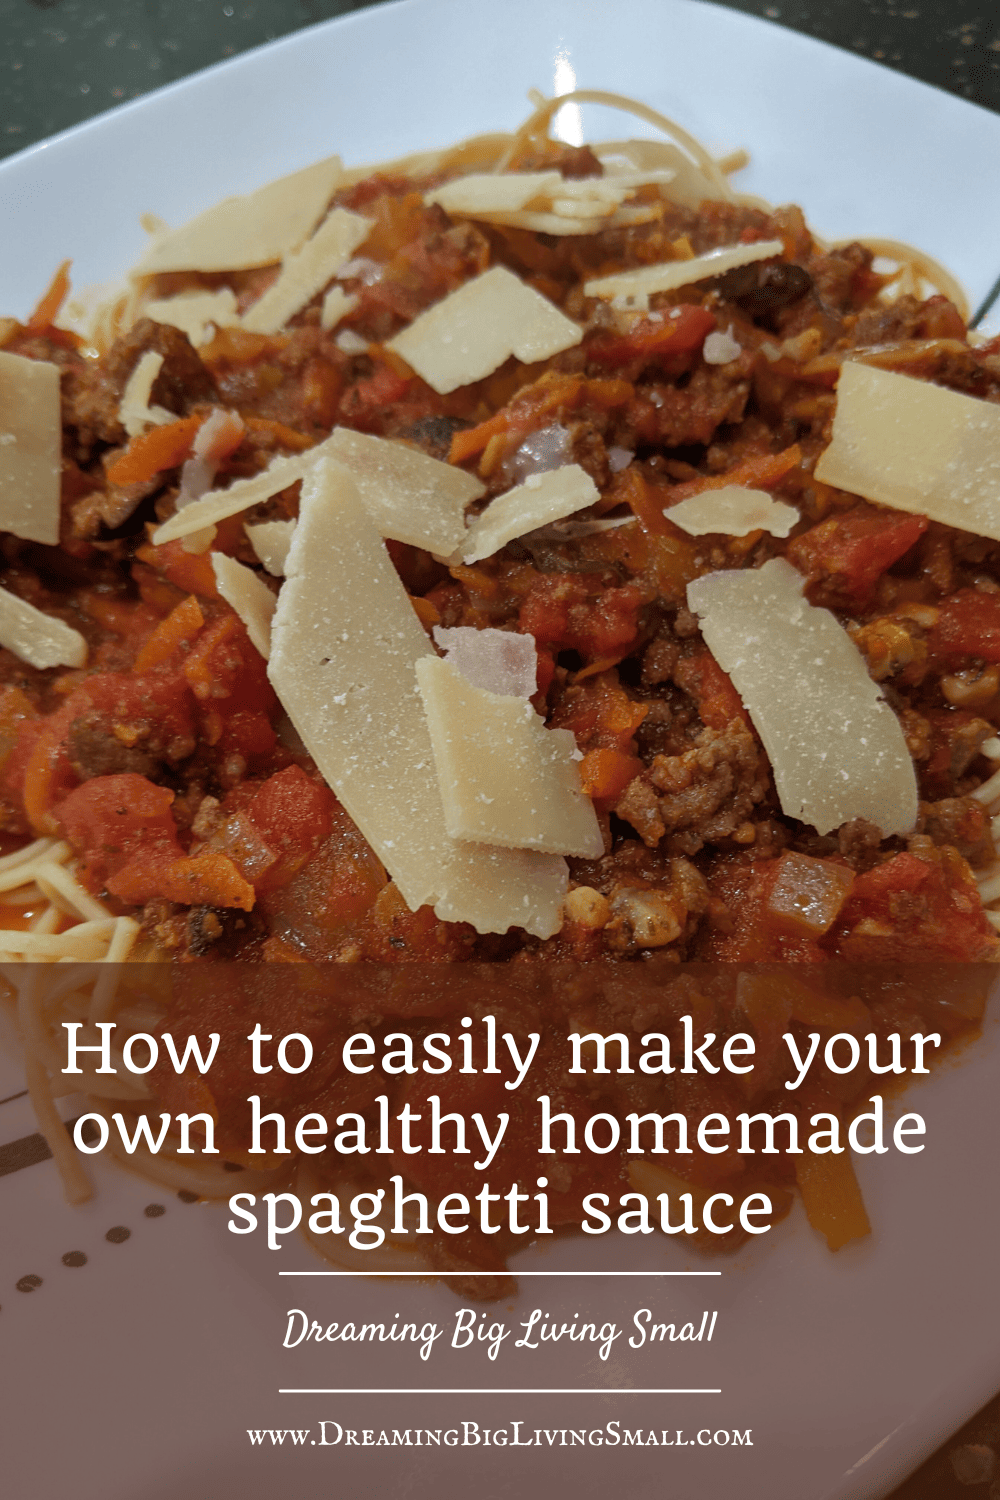 How to easily make your own healthy homemade spaghetti sauce